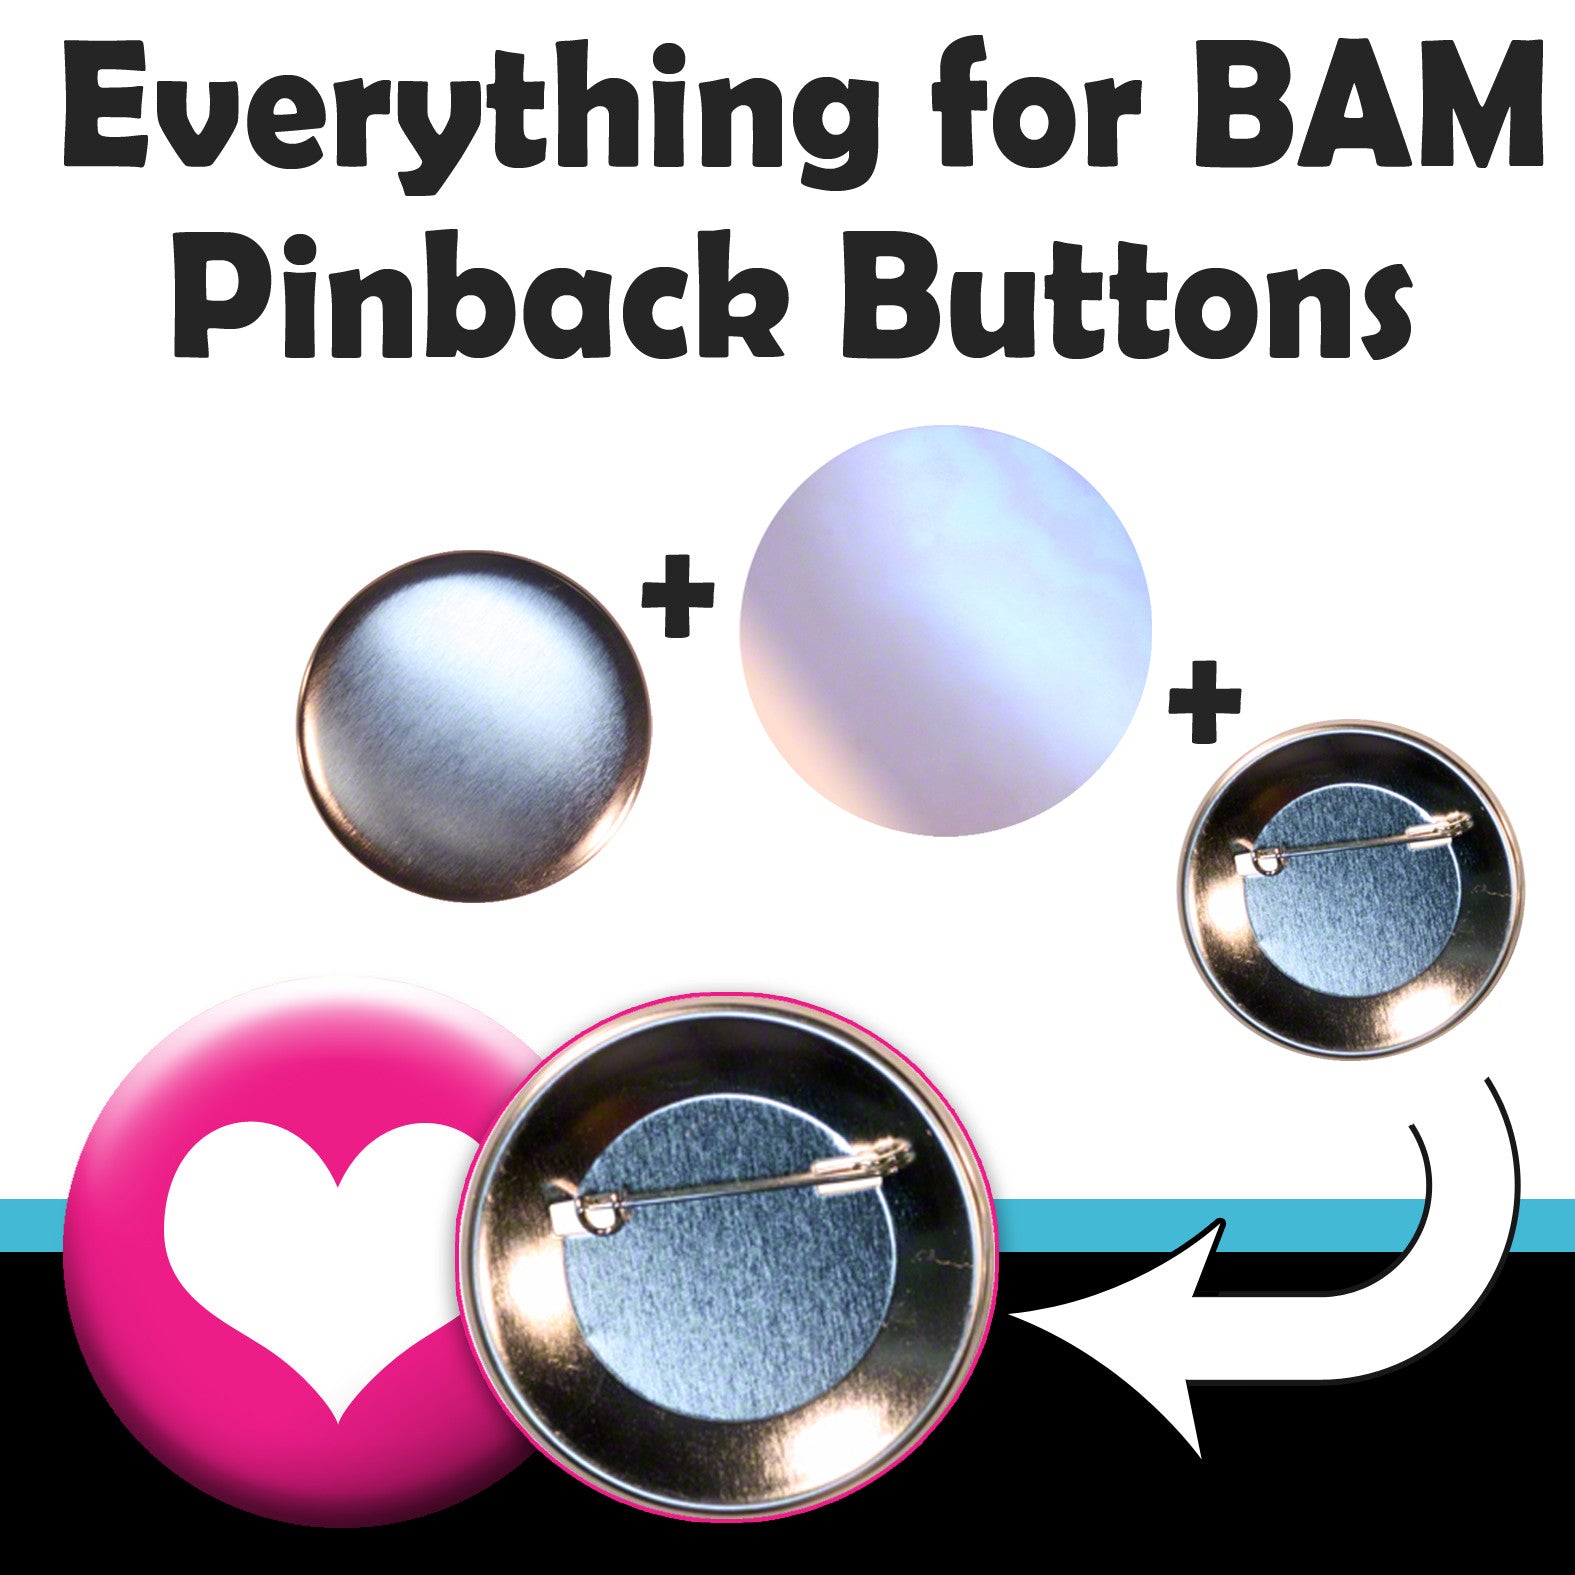 Your Custom Button maker - Order Your Own Custom Button & Pins